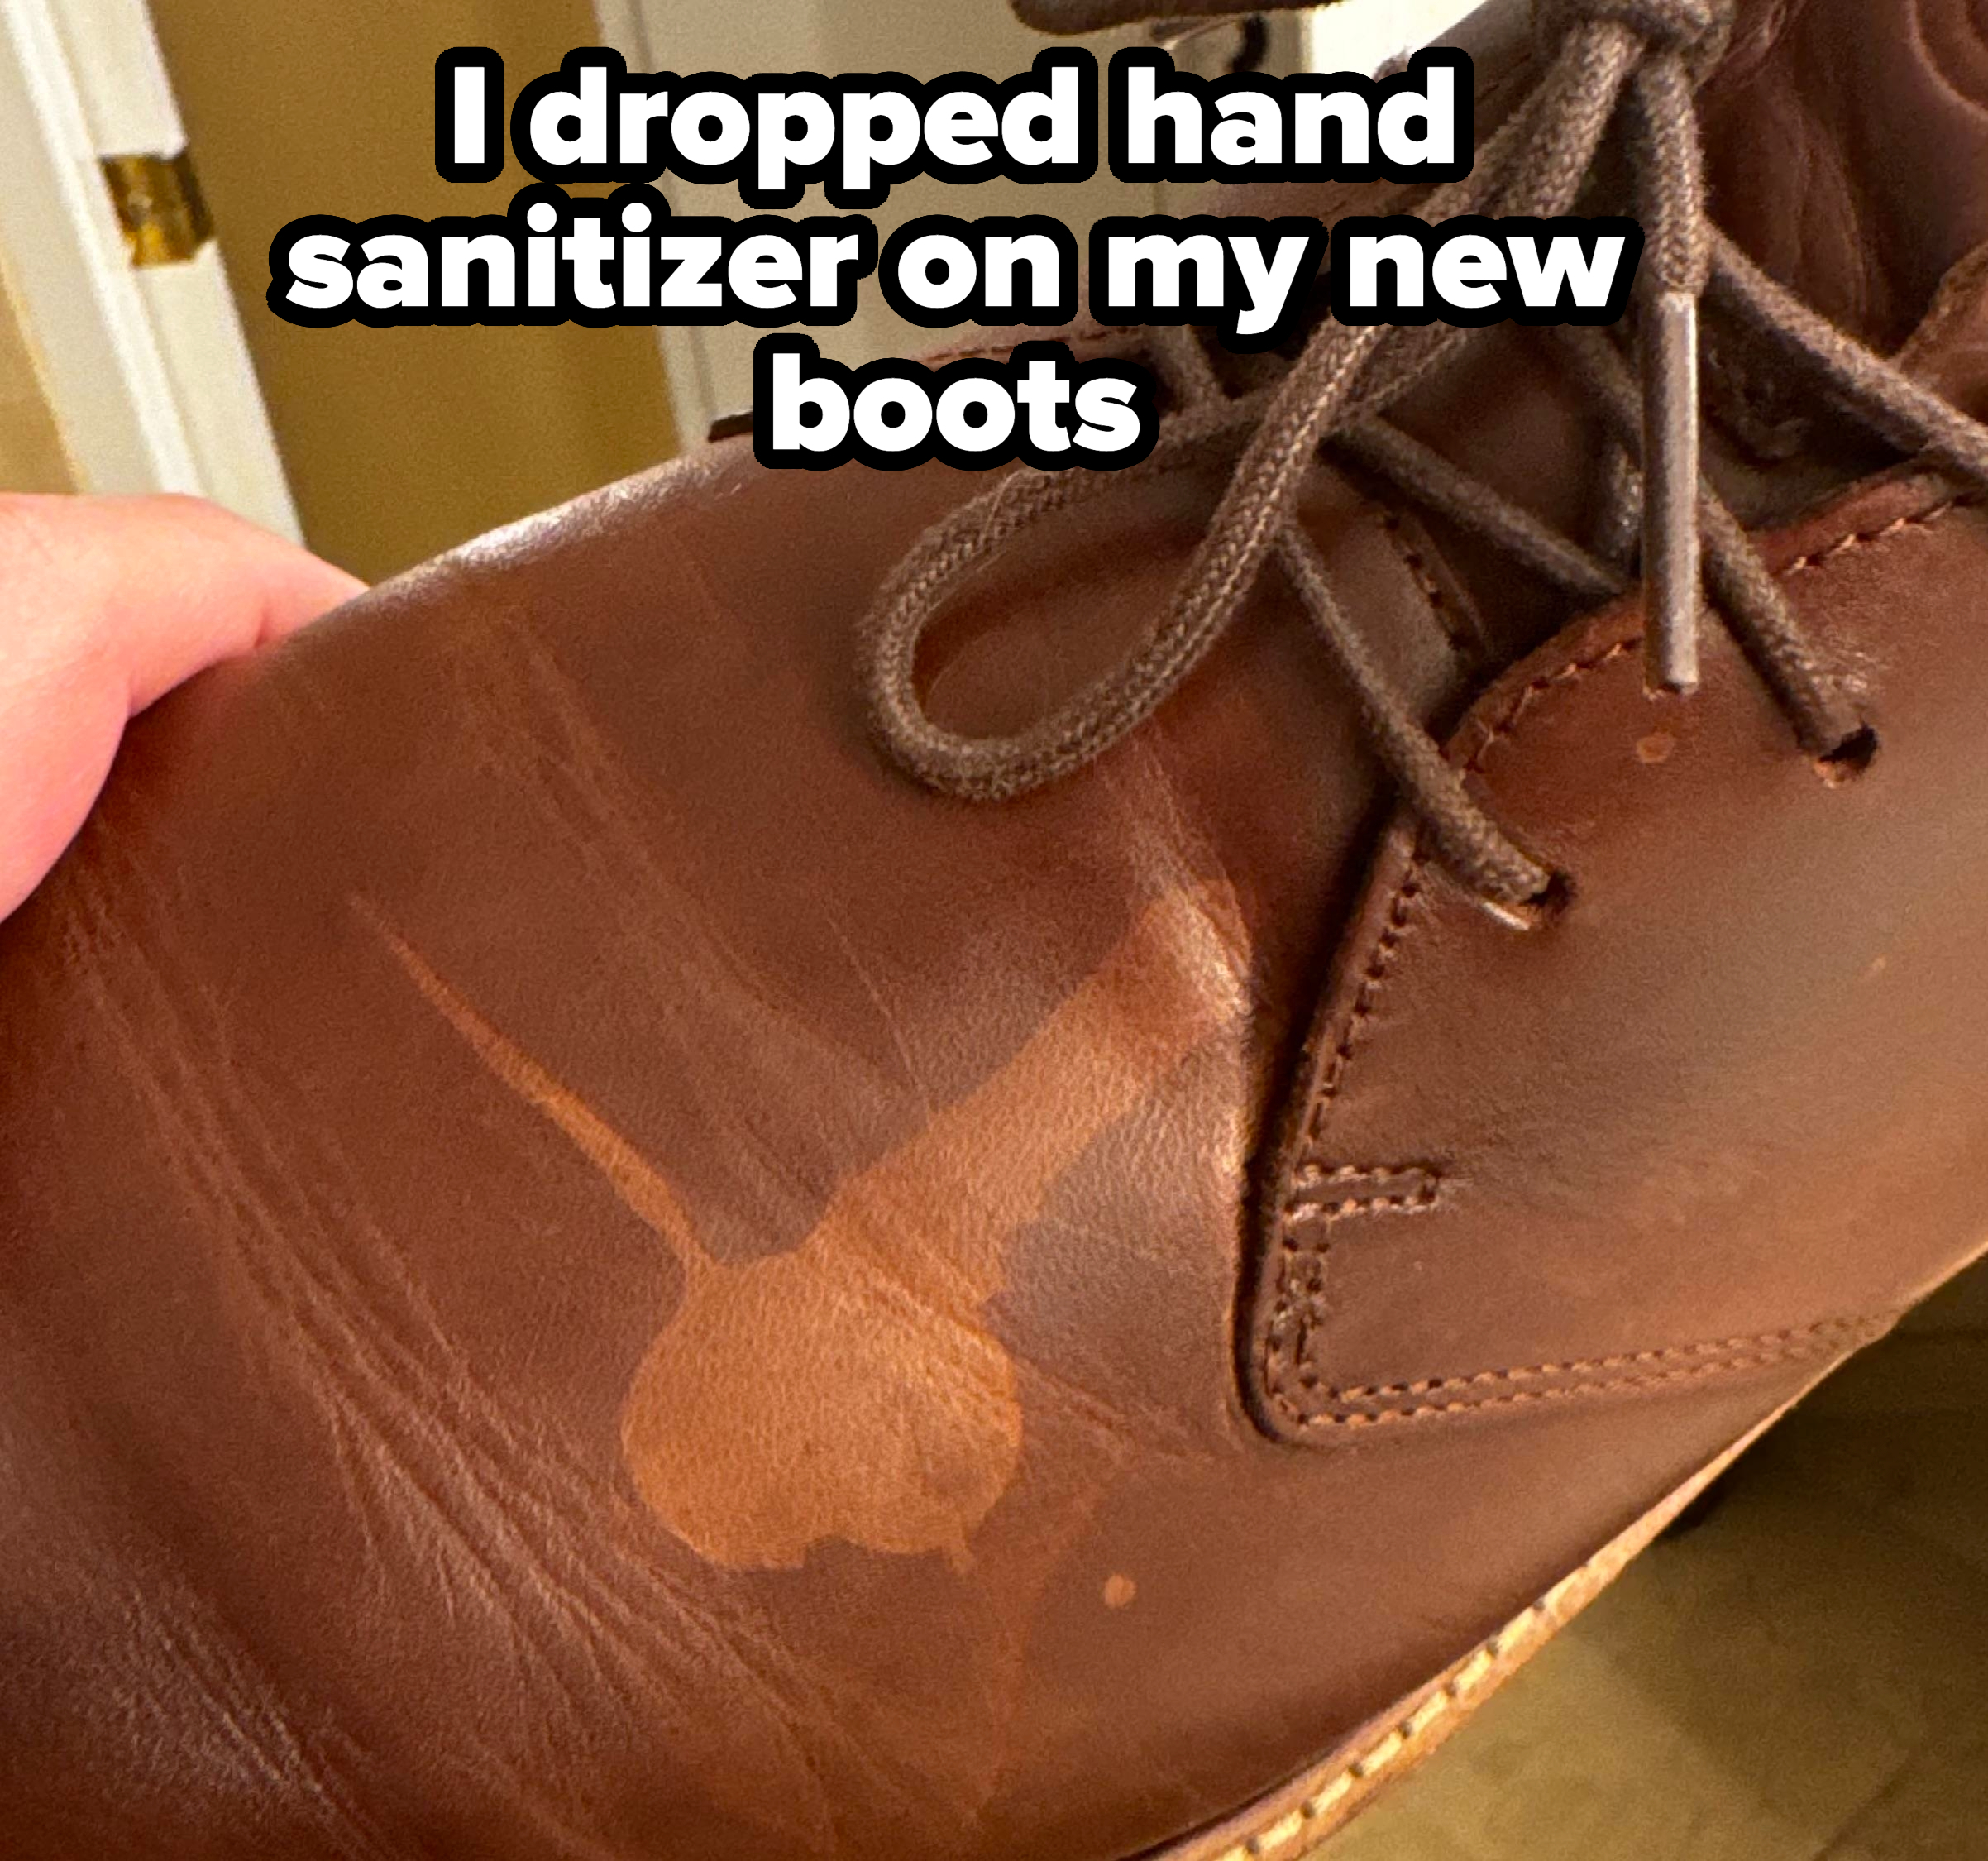 &quot;I dropped hand sanitizer on my new boots.&quot;